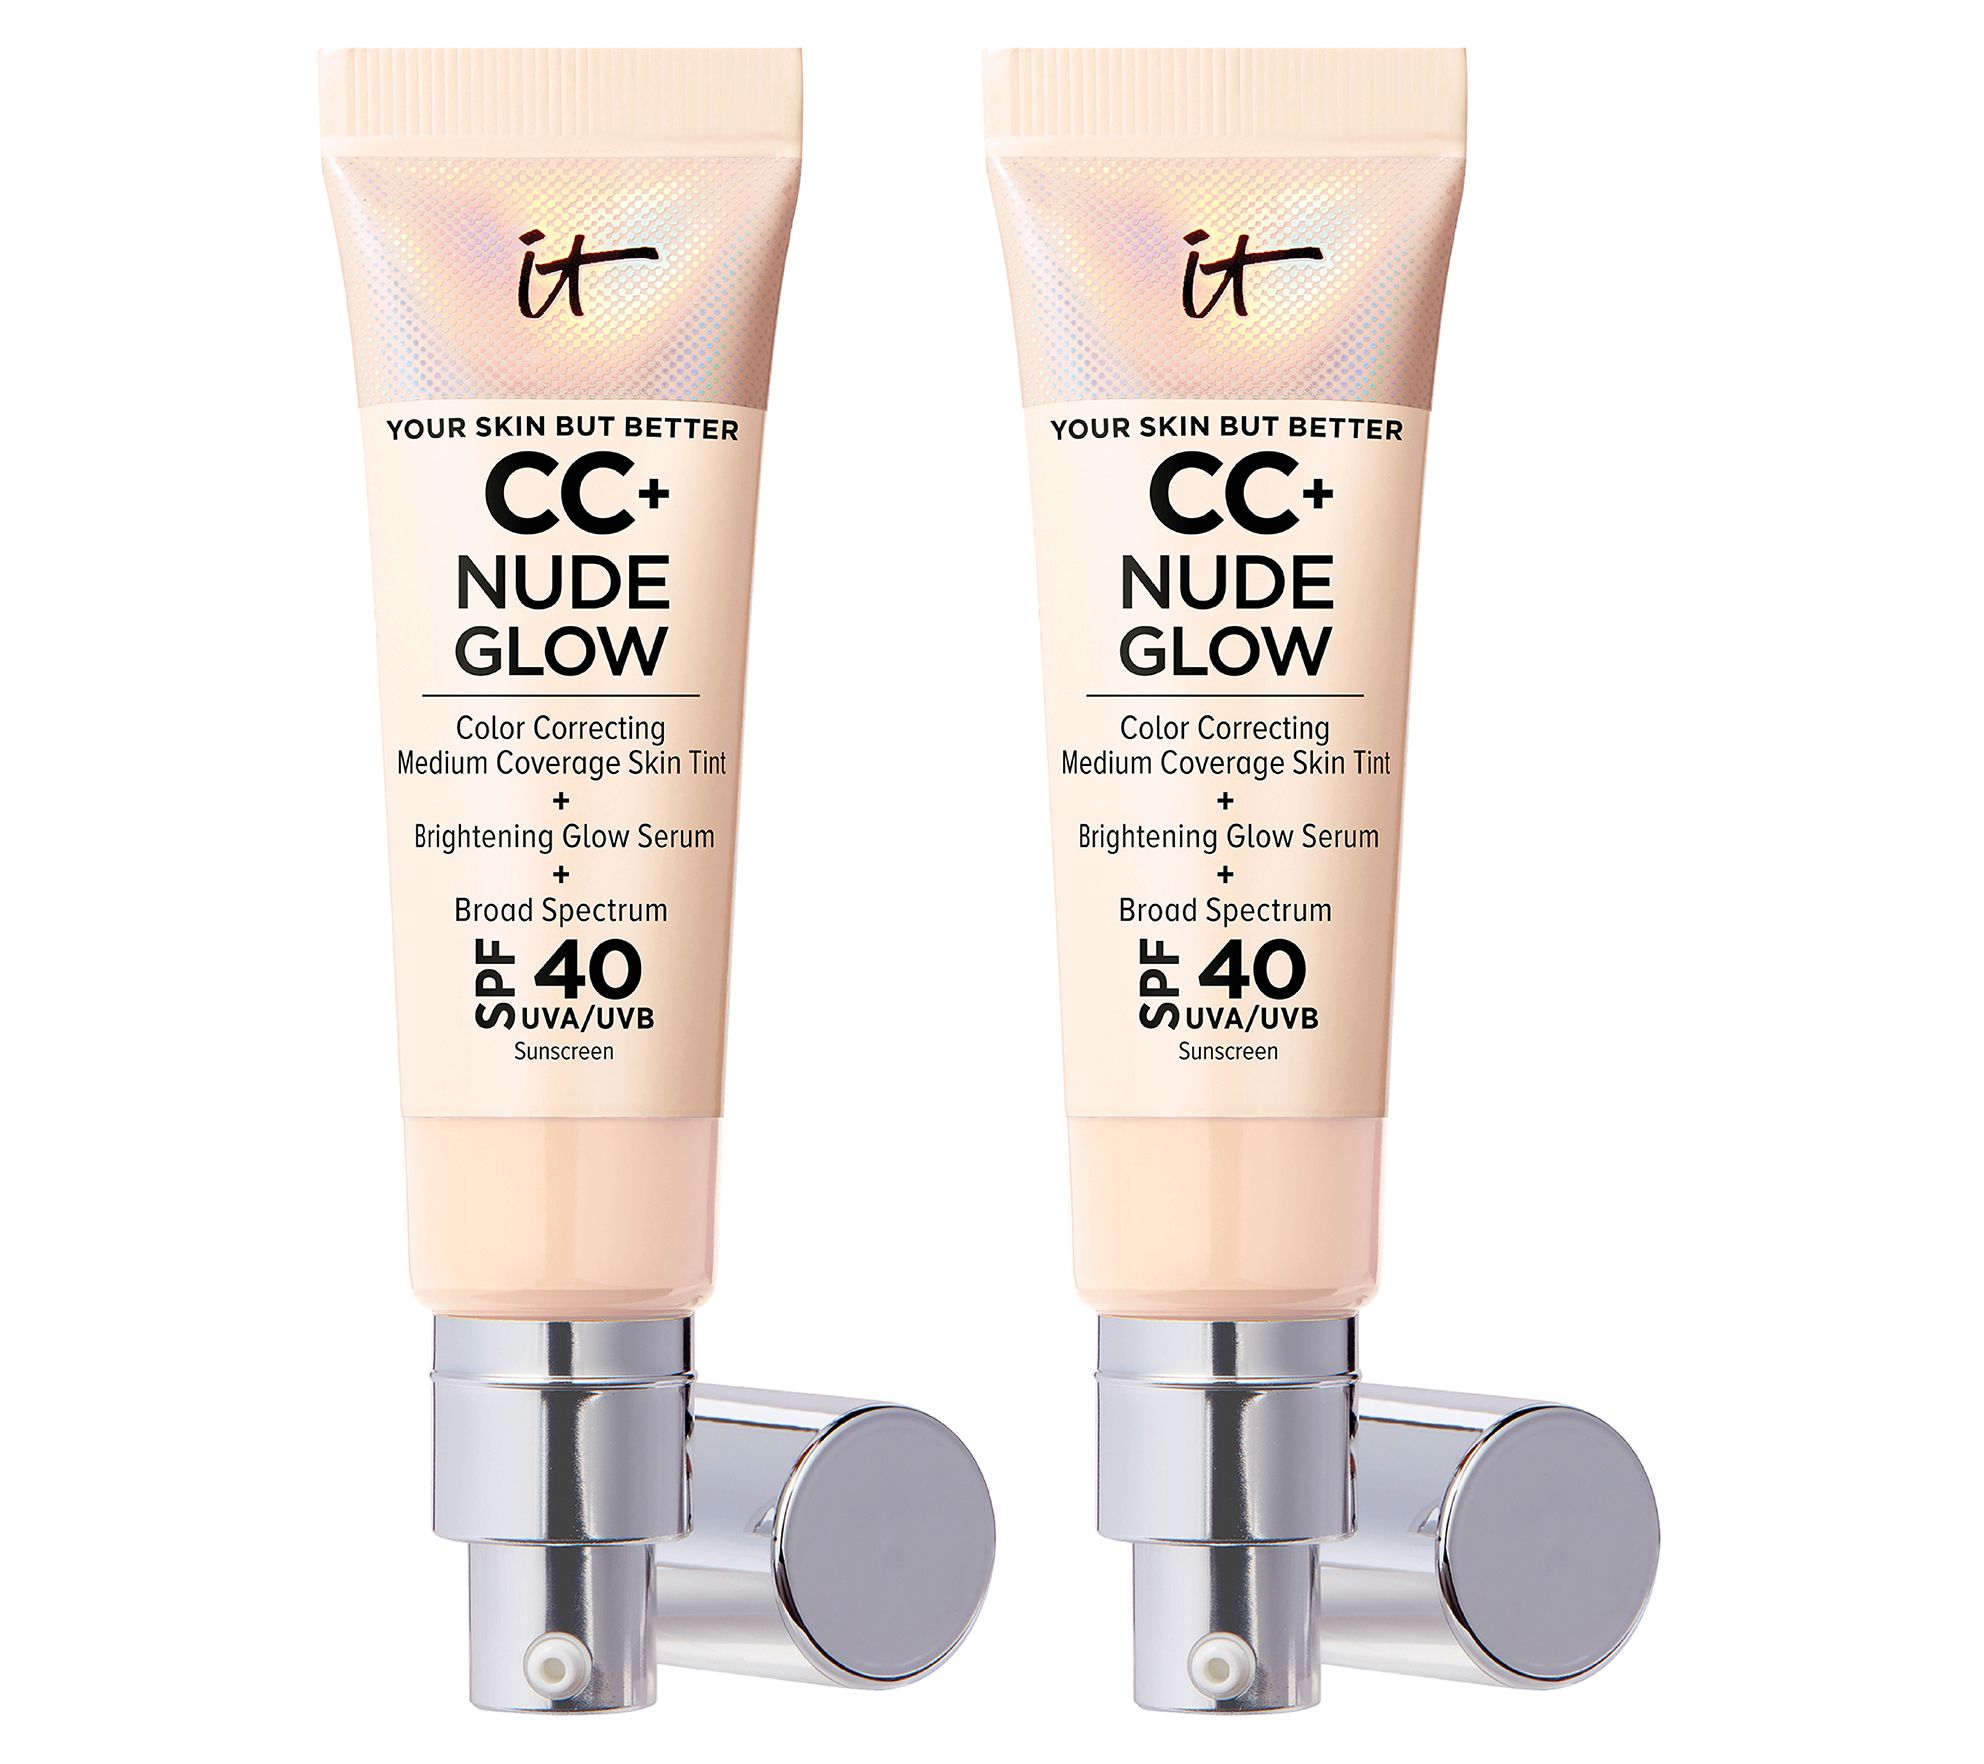 FOUNDATION WEEK! Chanel Les Beiges Sheer Healthy Glow Moisturizing Tint SPF  30 